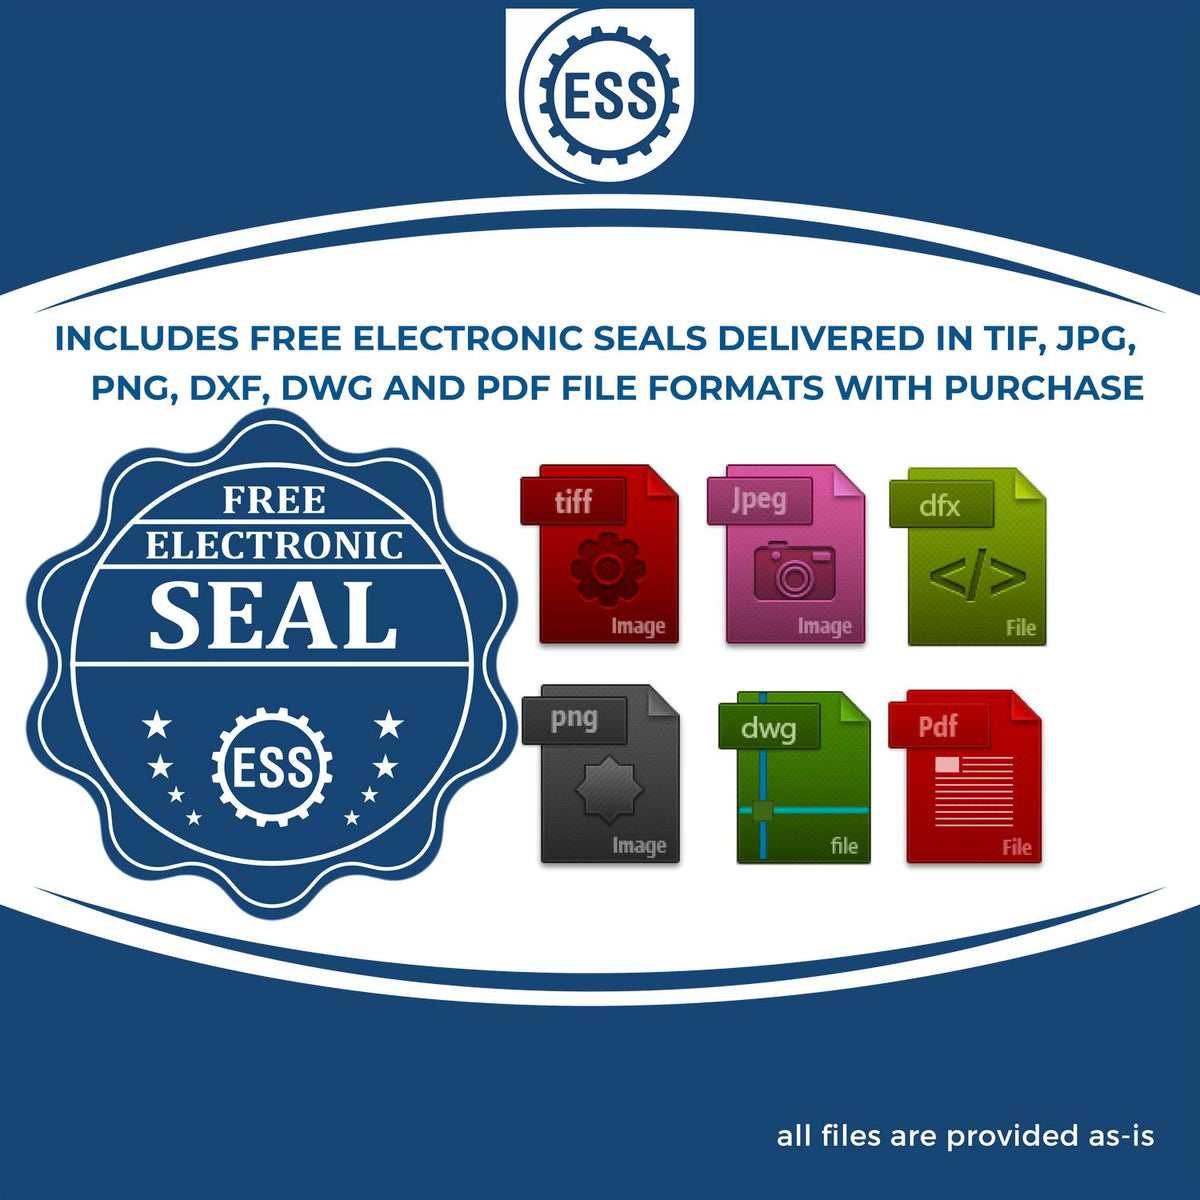 An infographic for the free electronic seal for the Hybrid West Virginia Geologist Seal illustrating the different file type icons such as DXF, DWG, TIF, JPG and PNG.